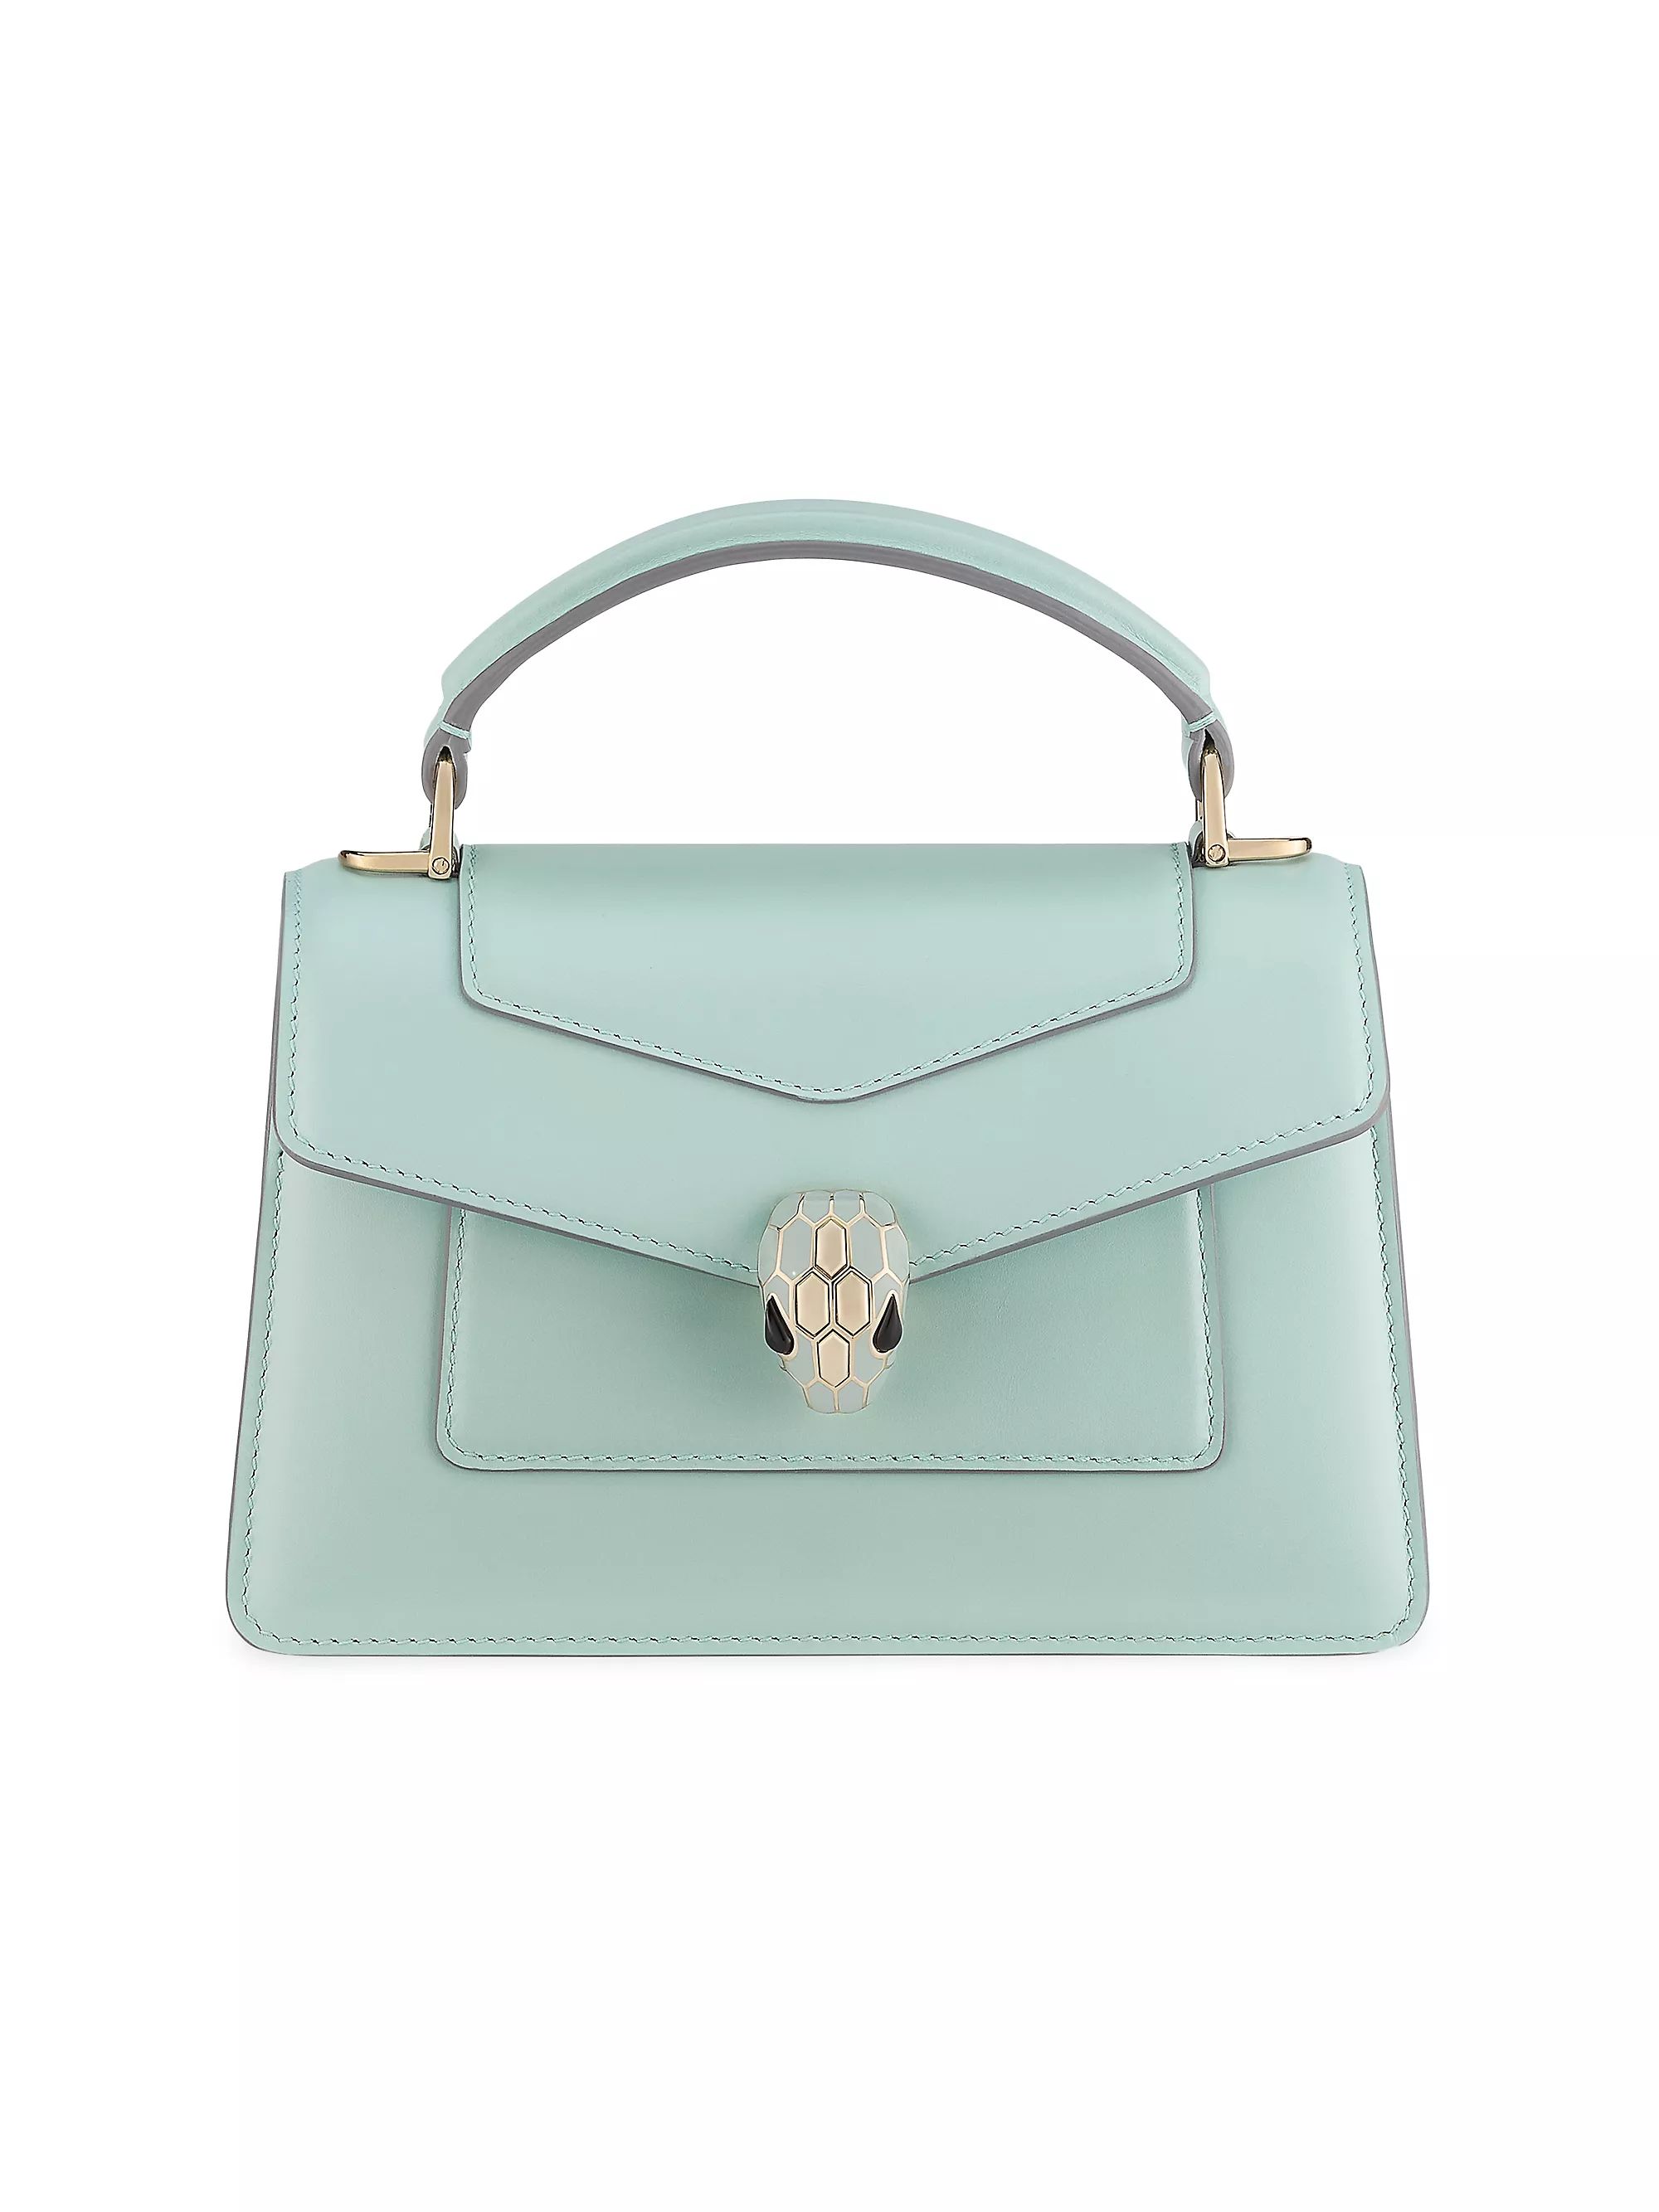 Shop By CategoryTop Handles & SatchelsBVLGARIMini Serpenti Forever Leather Top-Handle Bag$3,250 | Saks Fifth Avenue